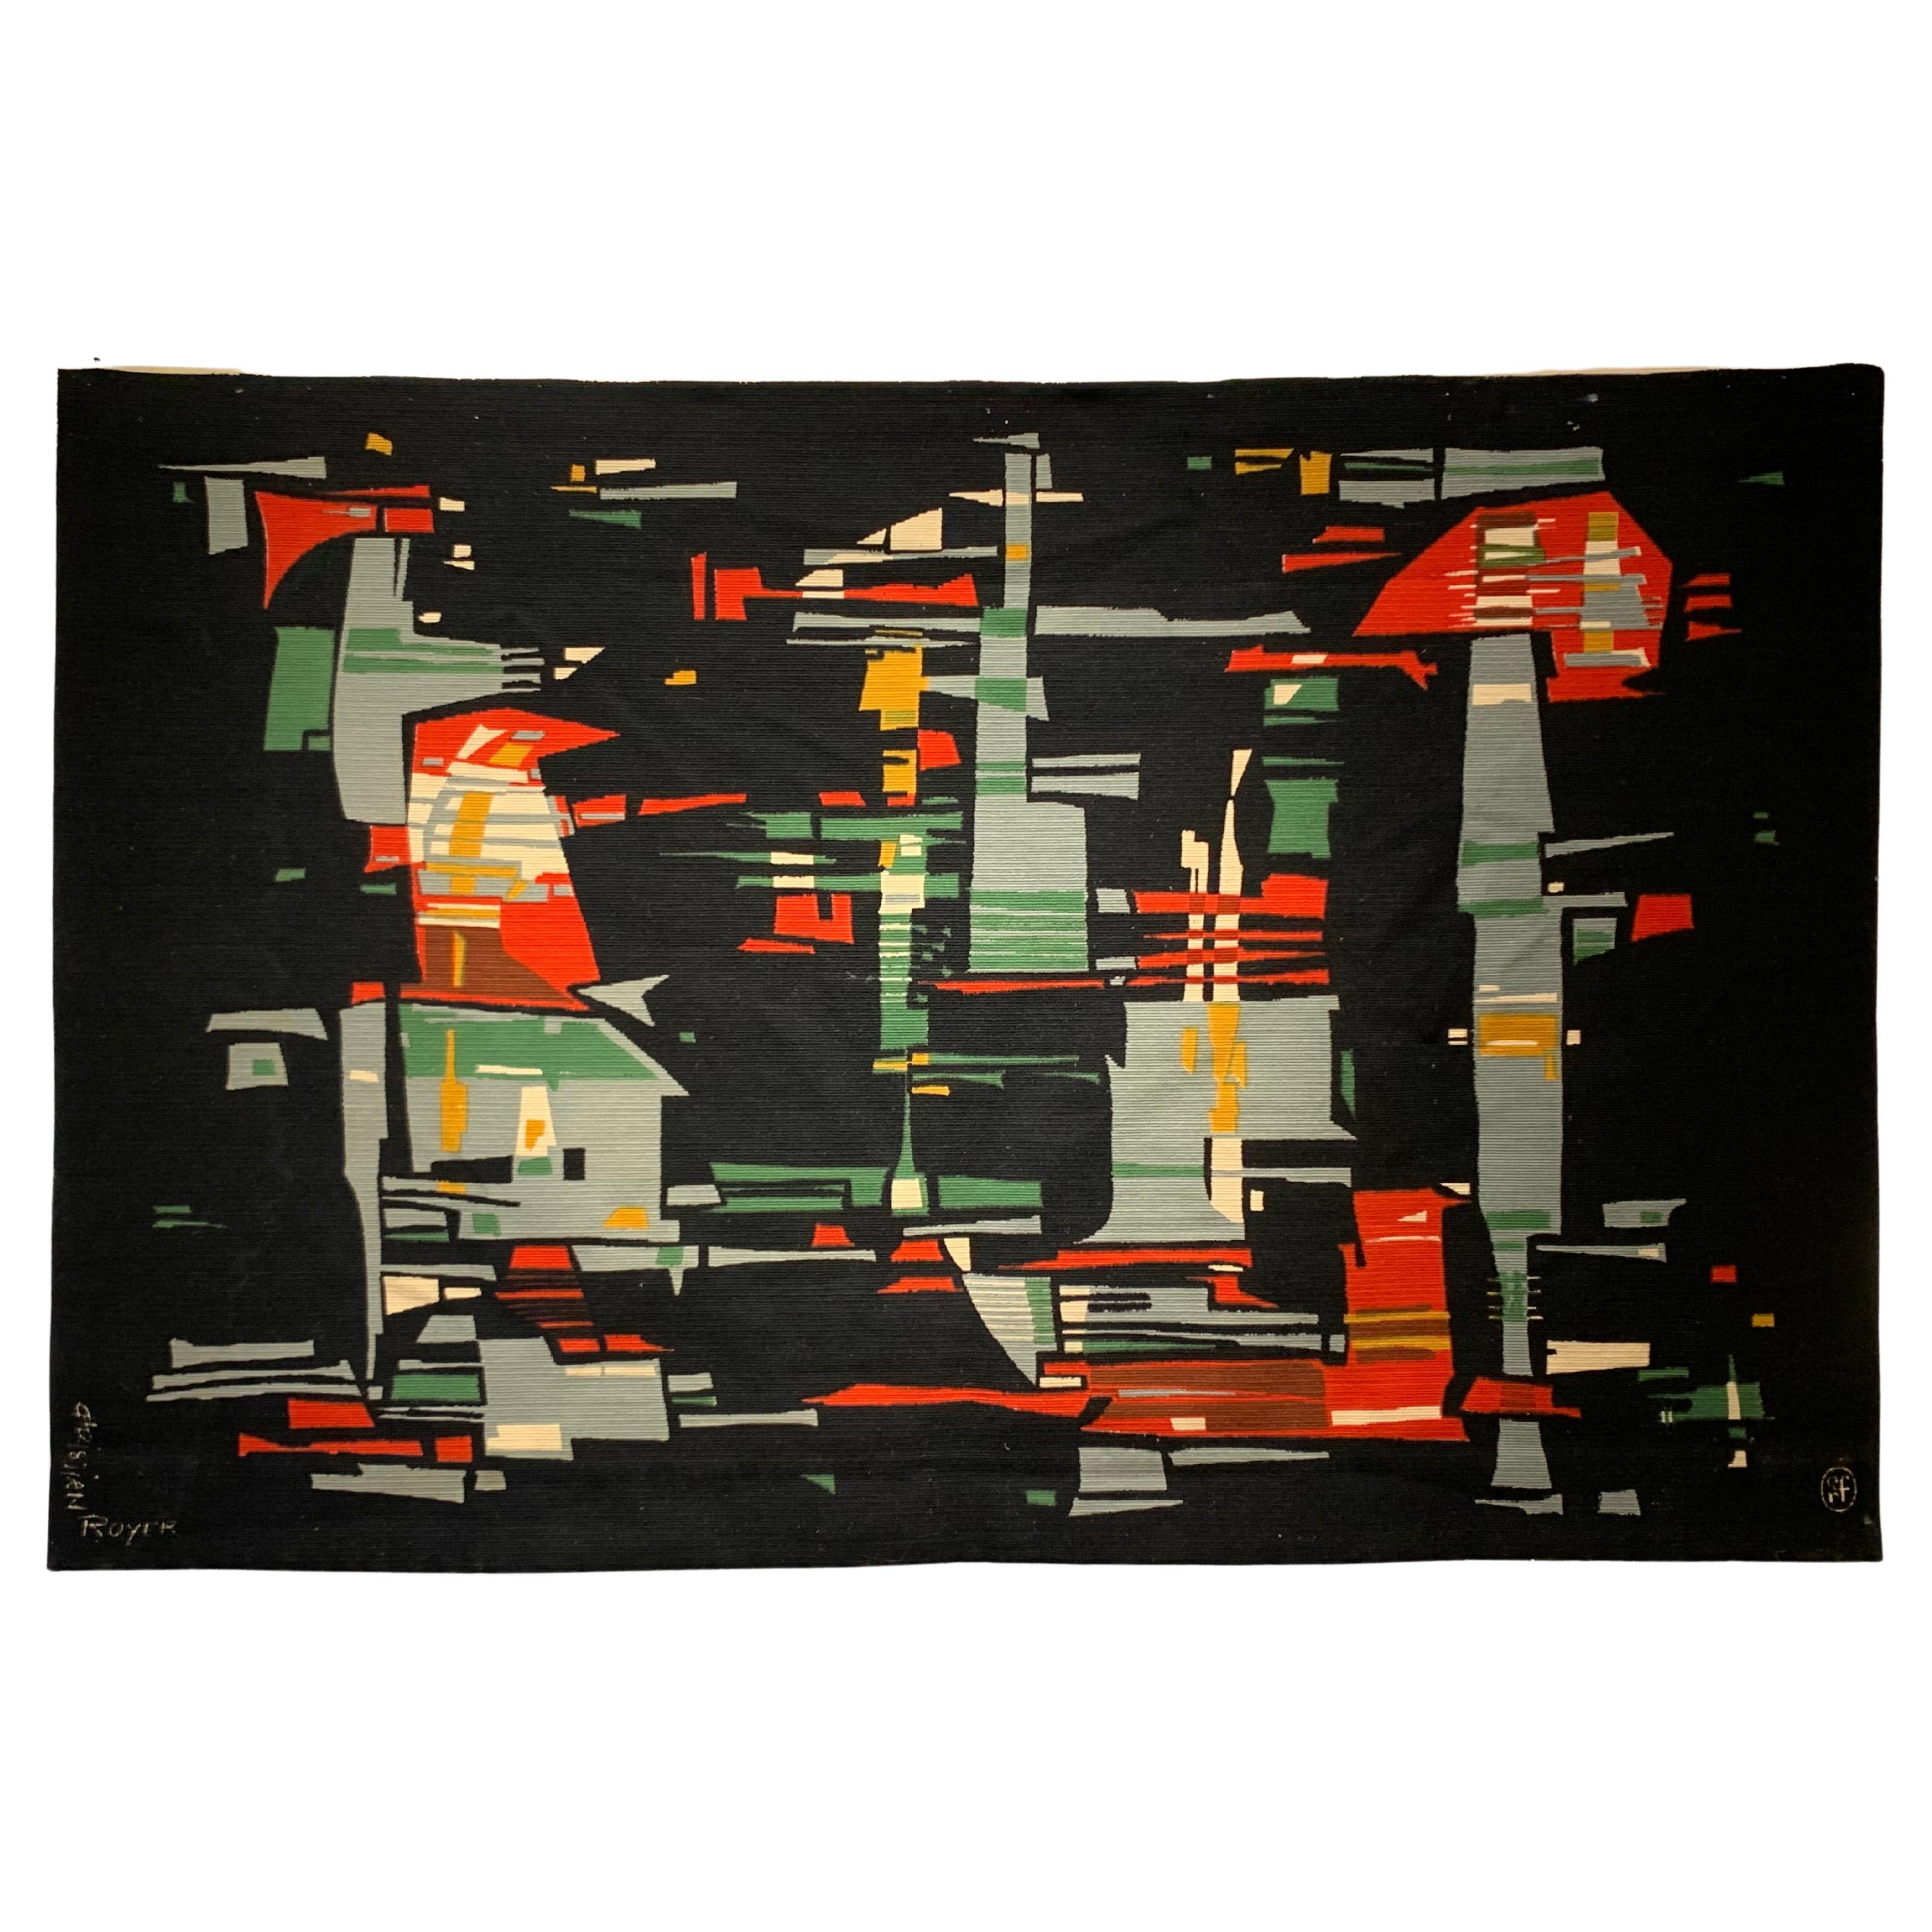 French Vintage Mid-Century tapestry signed by Christian Royer